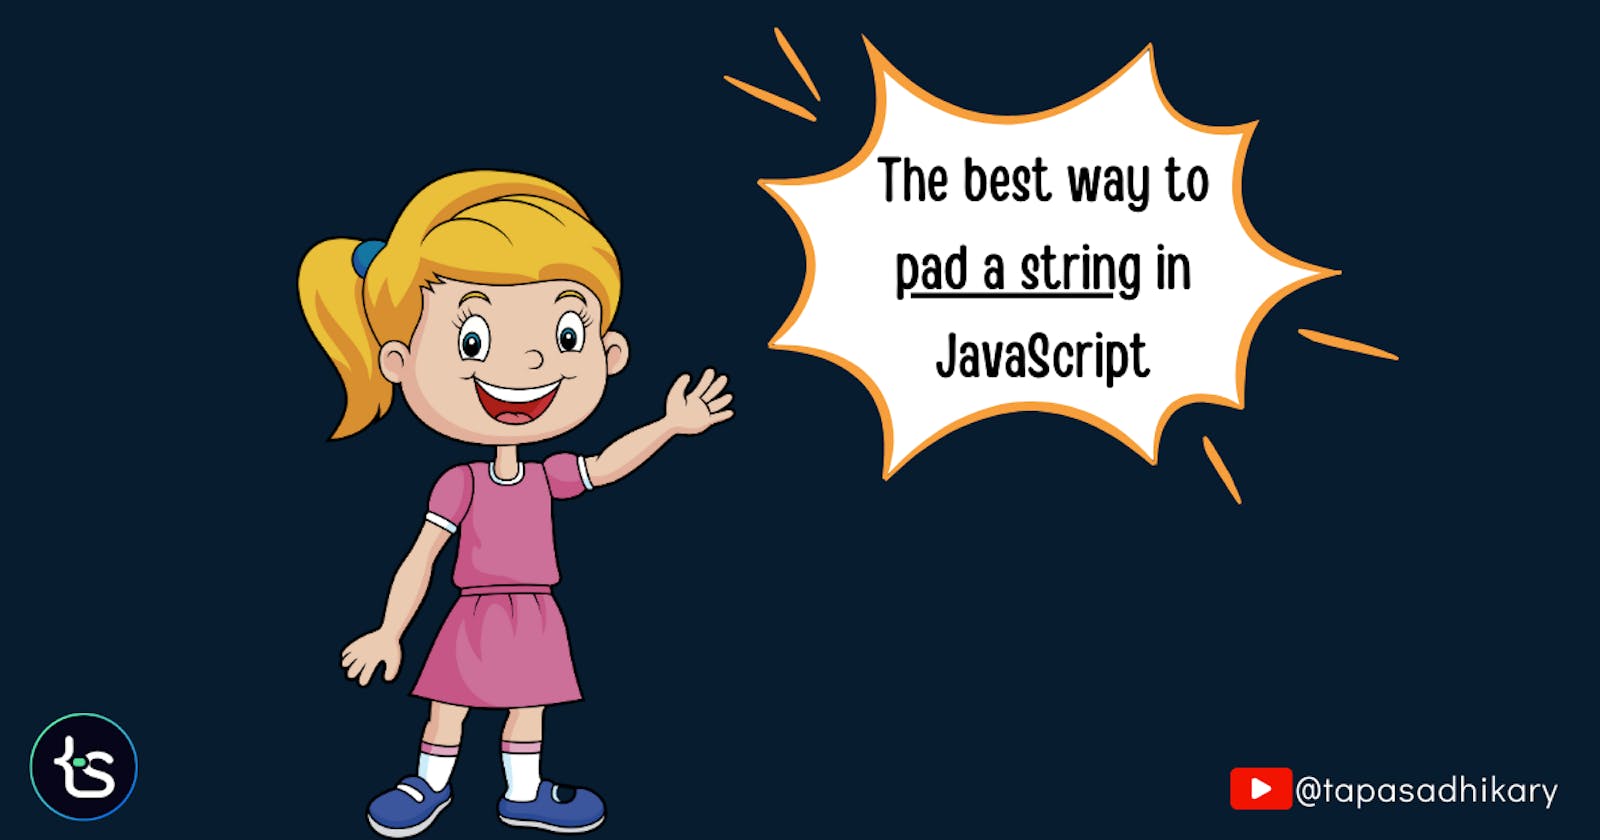 The best way to pad a string in JavaScript